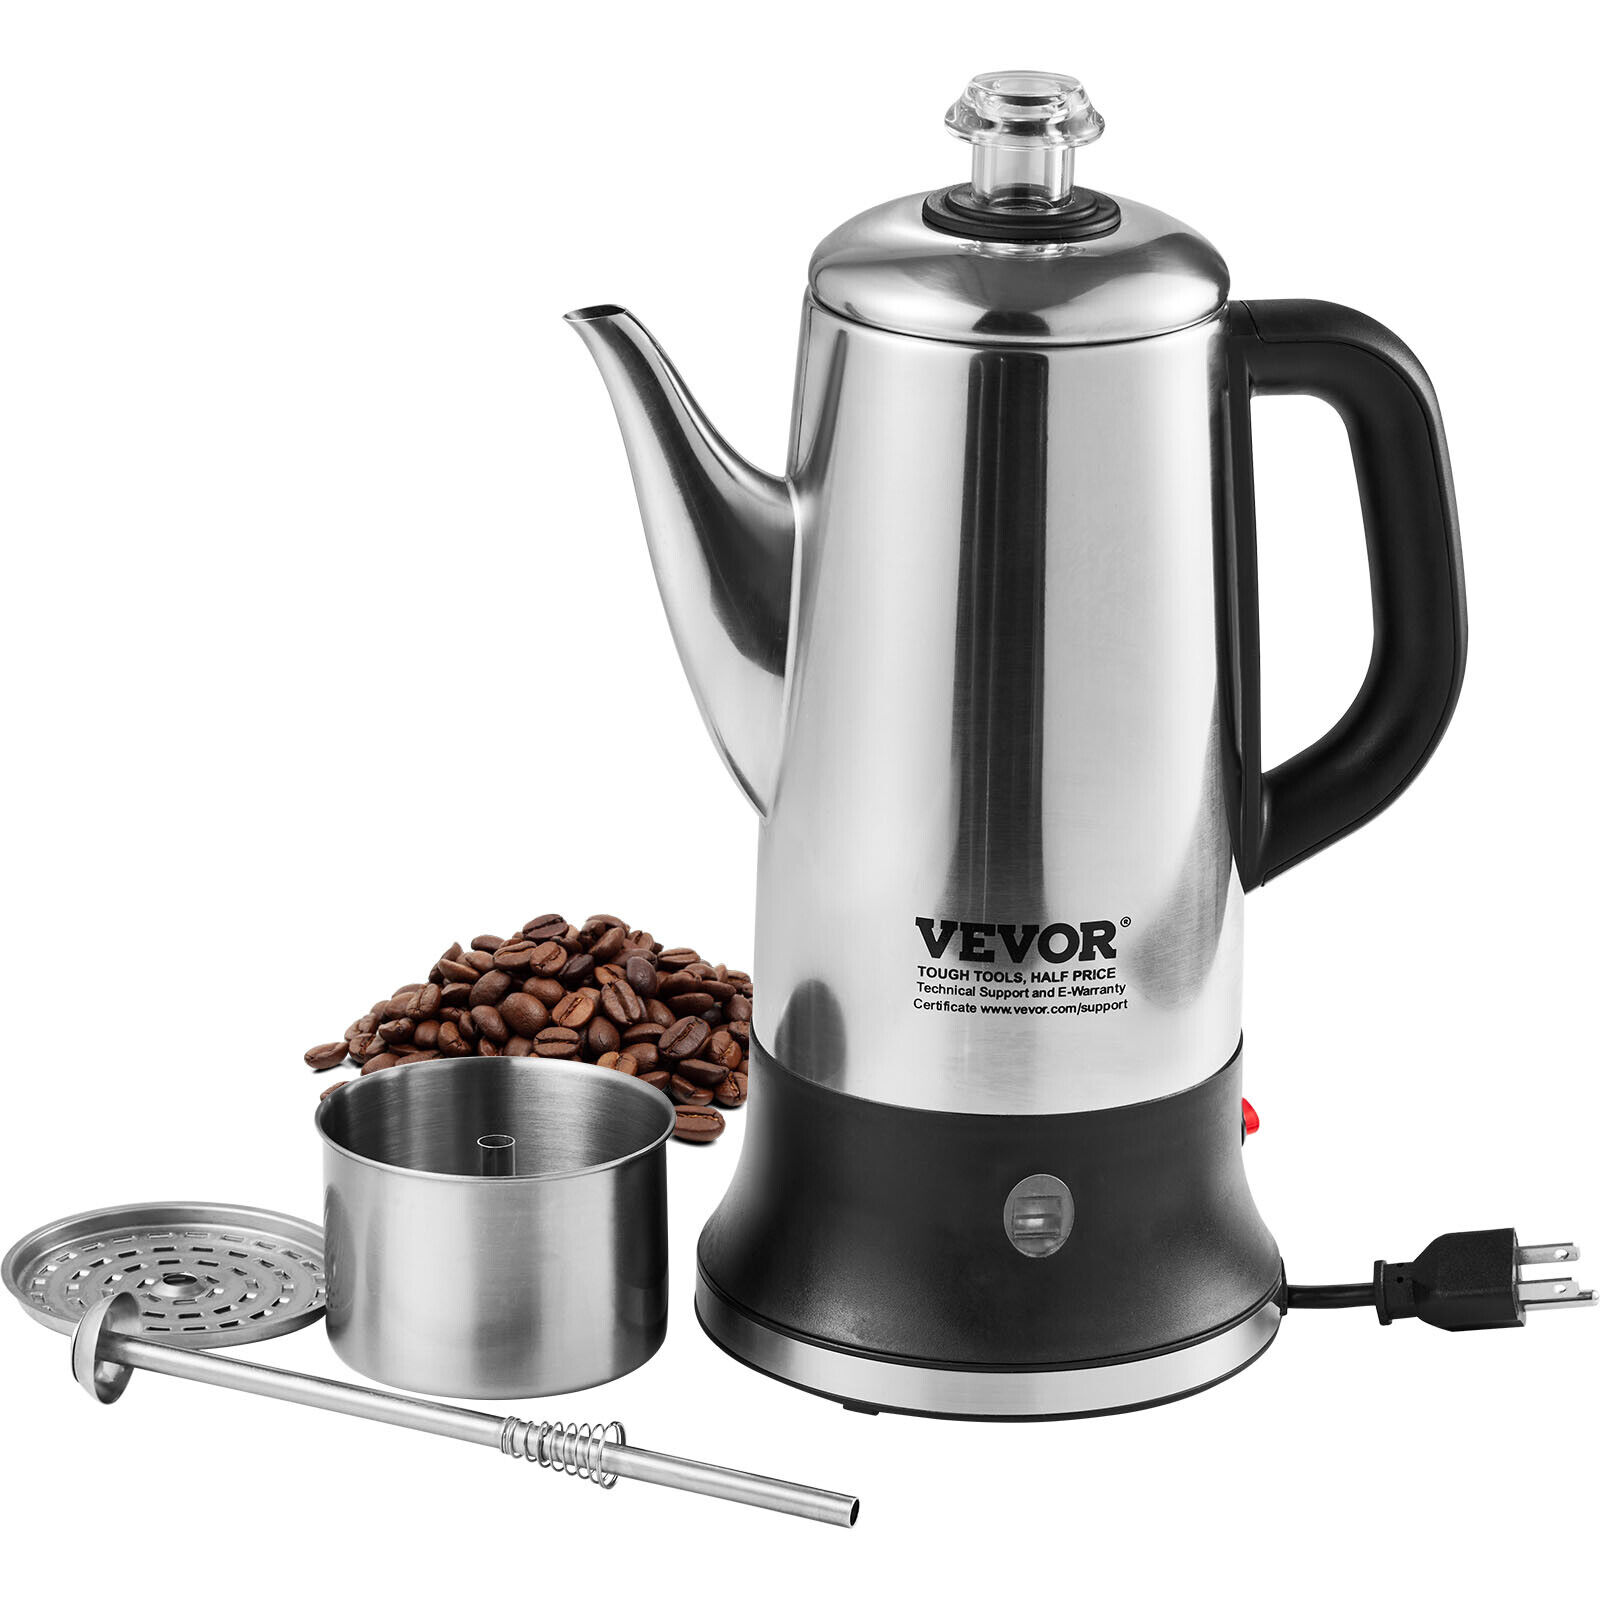 VEVOR 12-Cup Electric Percolator Coffee Pot Stainless Steel Coffee Maker Silver.